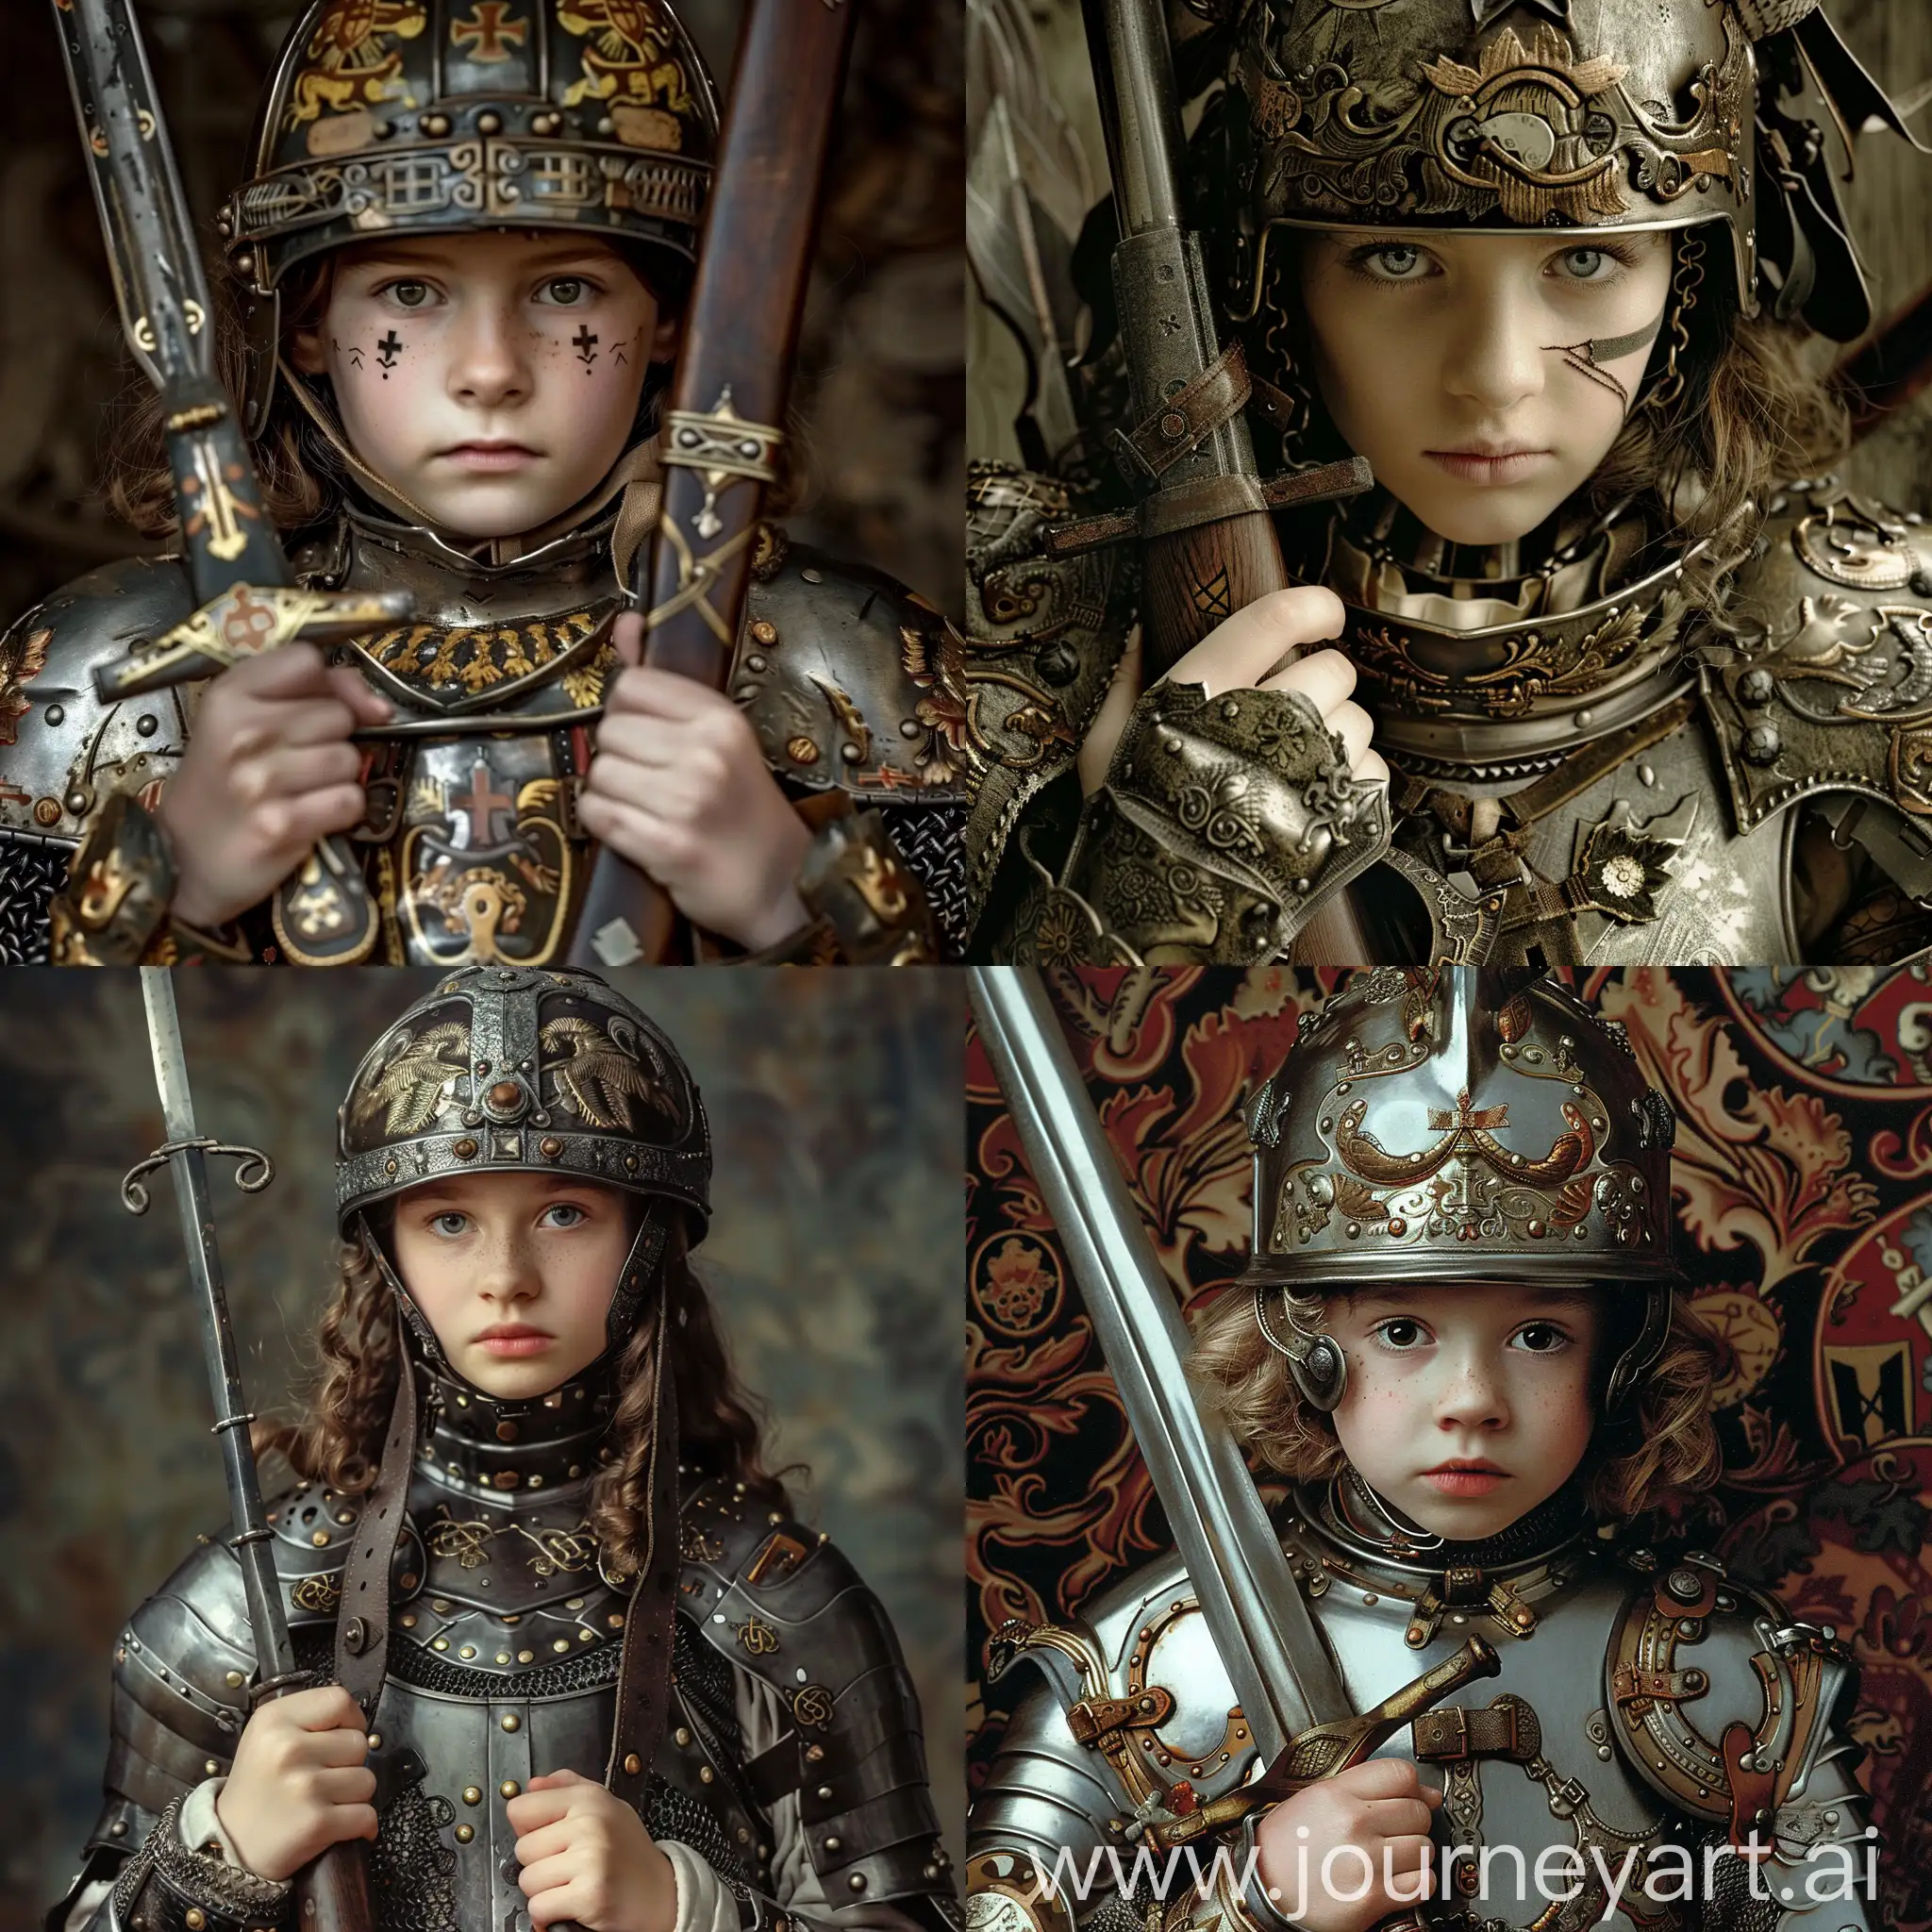 German-Girls-Wearing-Armor-with-Weapons-in-Traditional-Style